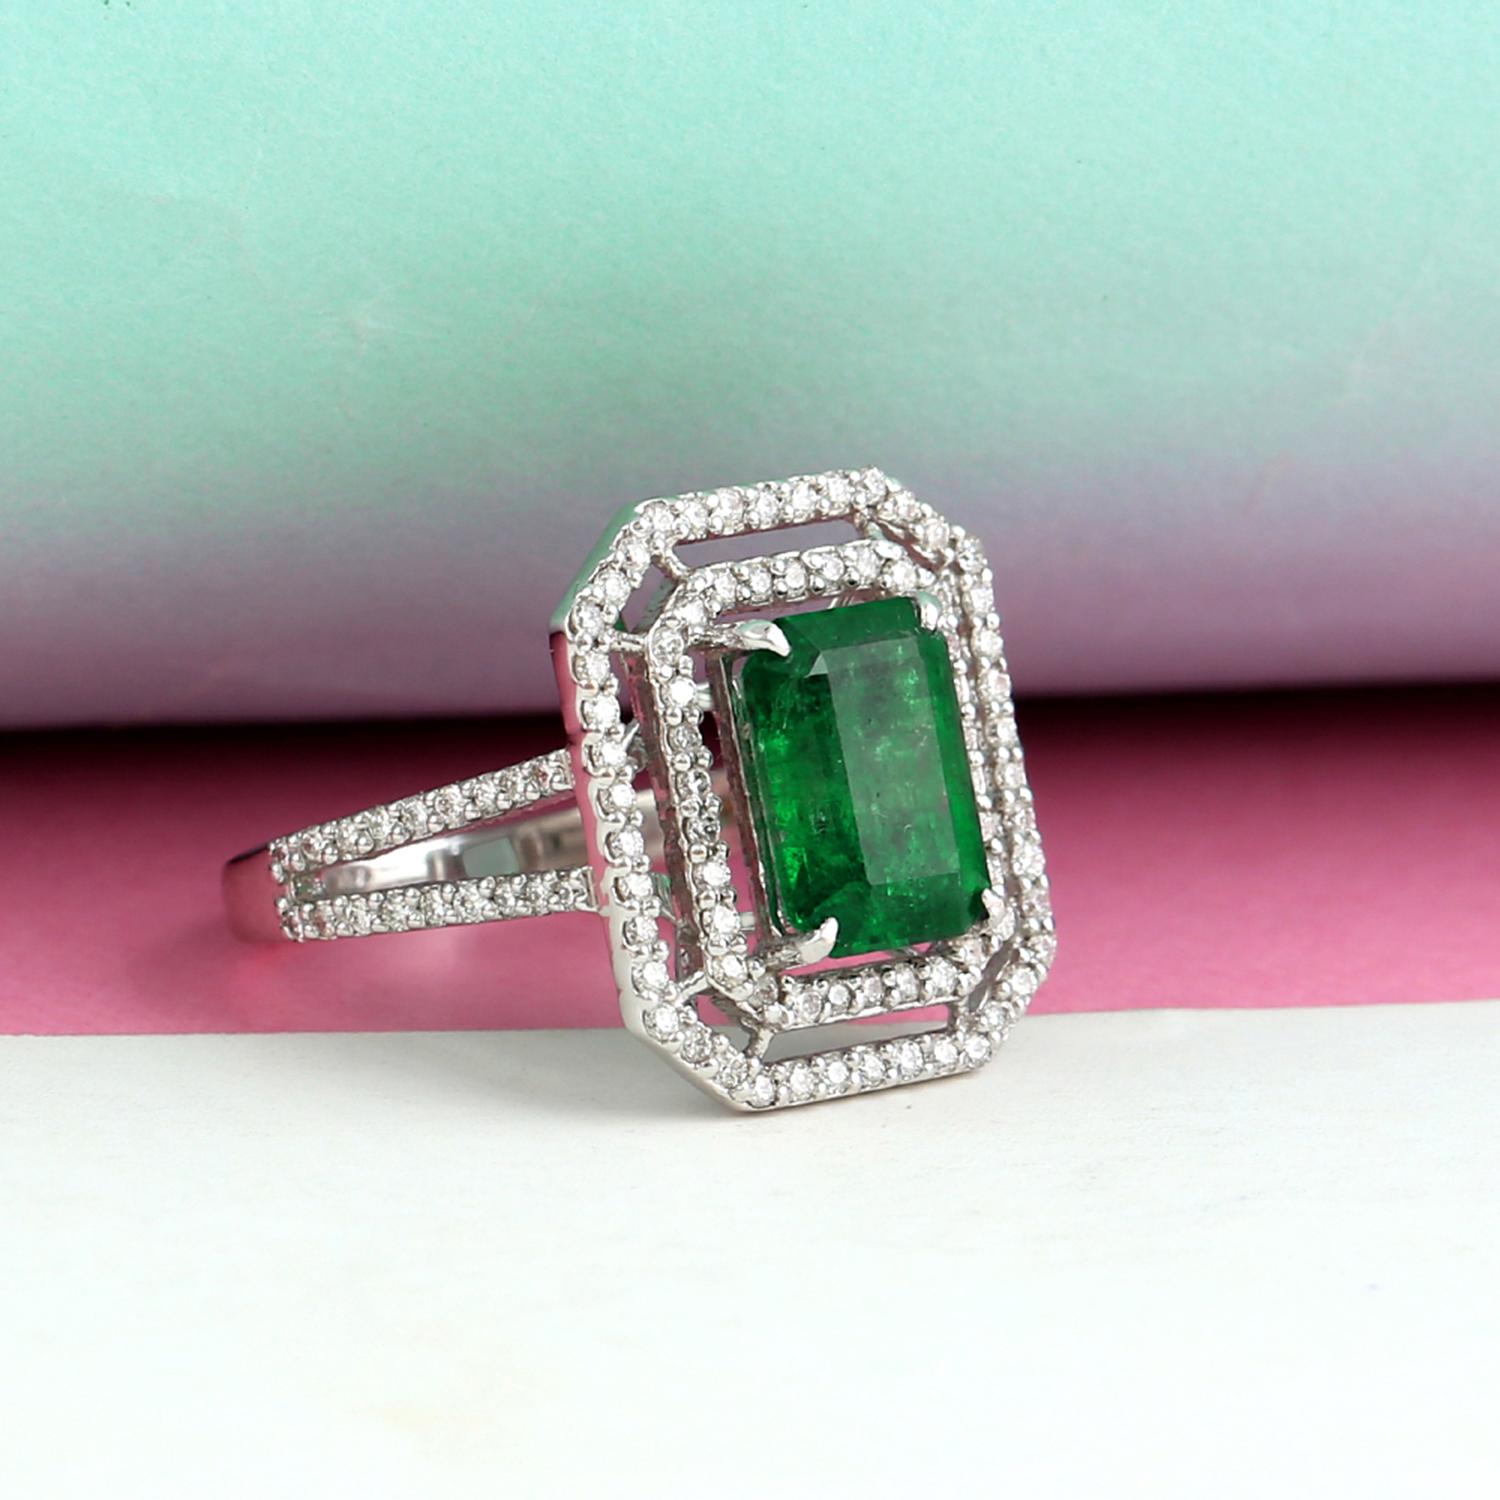 Art Nouveau Octogen Cut Zambian Emerald Ring with Diamonds Made in 14k White Gold For Sale